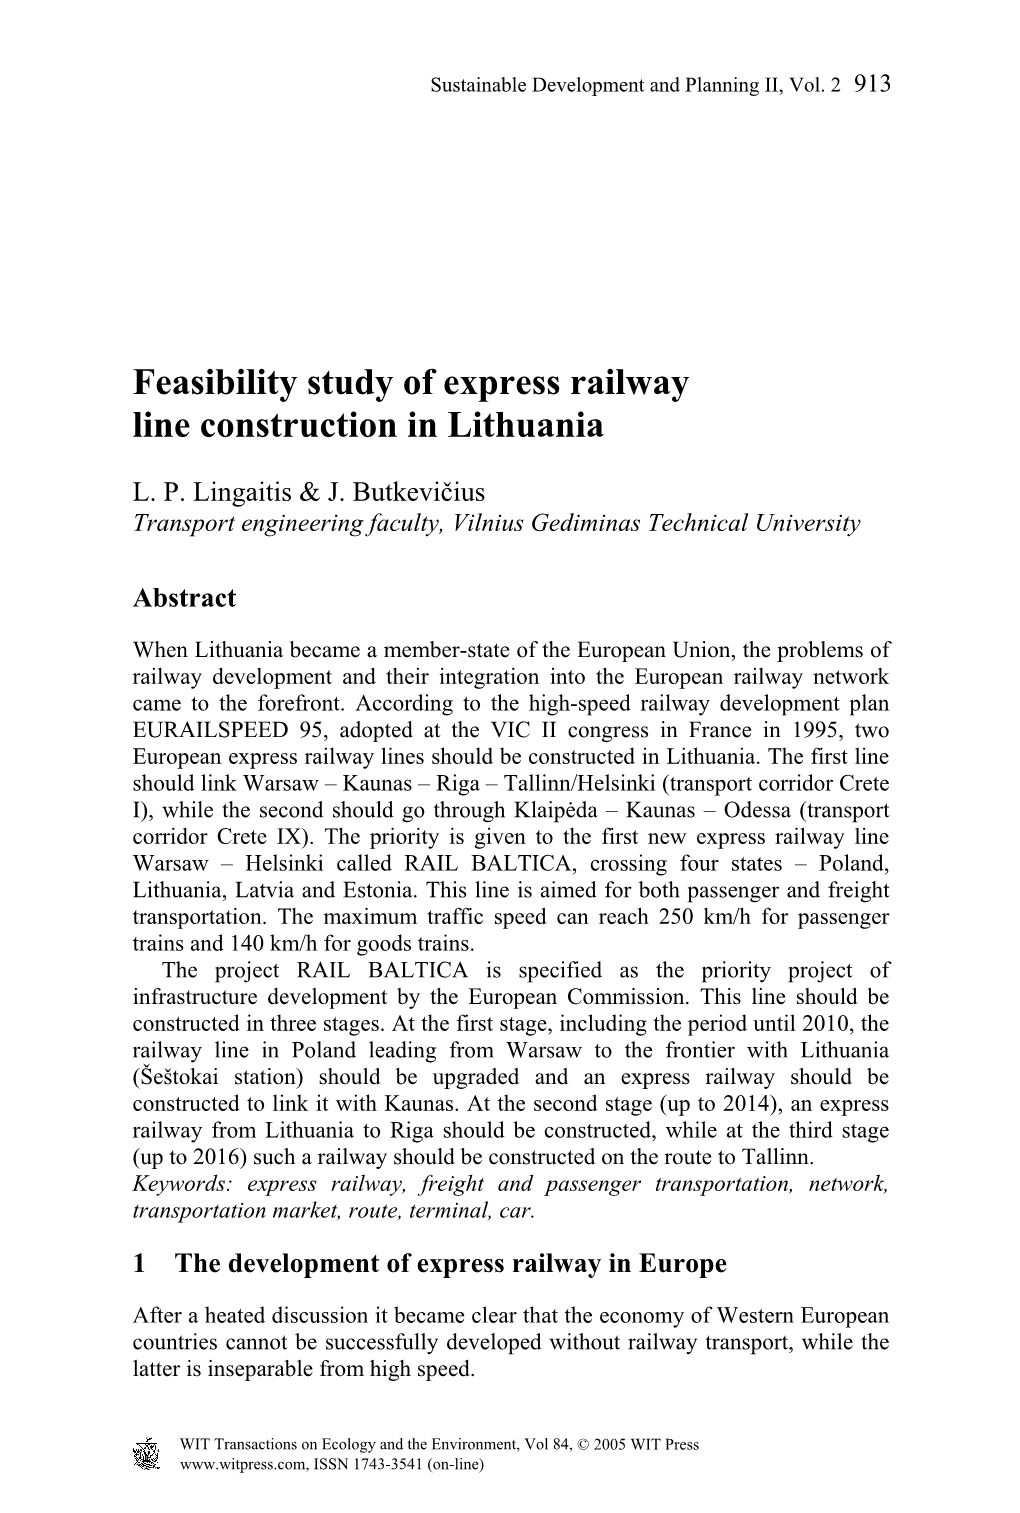 Feasibility Study of Express Railway Line Construction in Lithuania